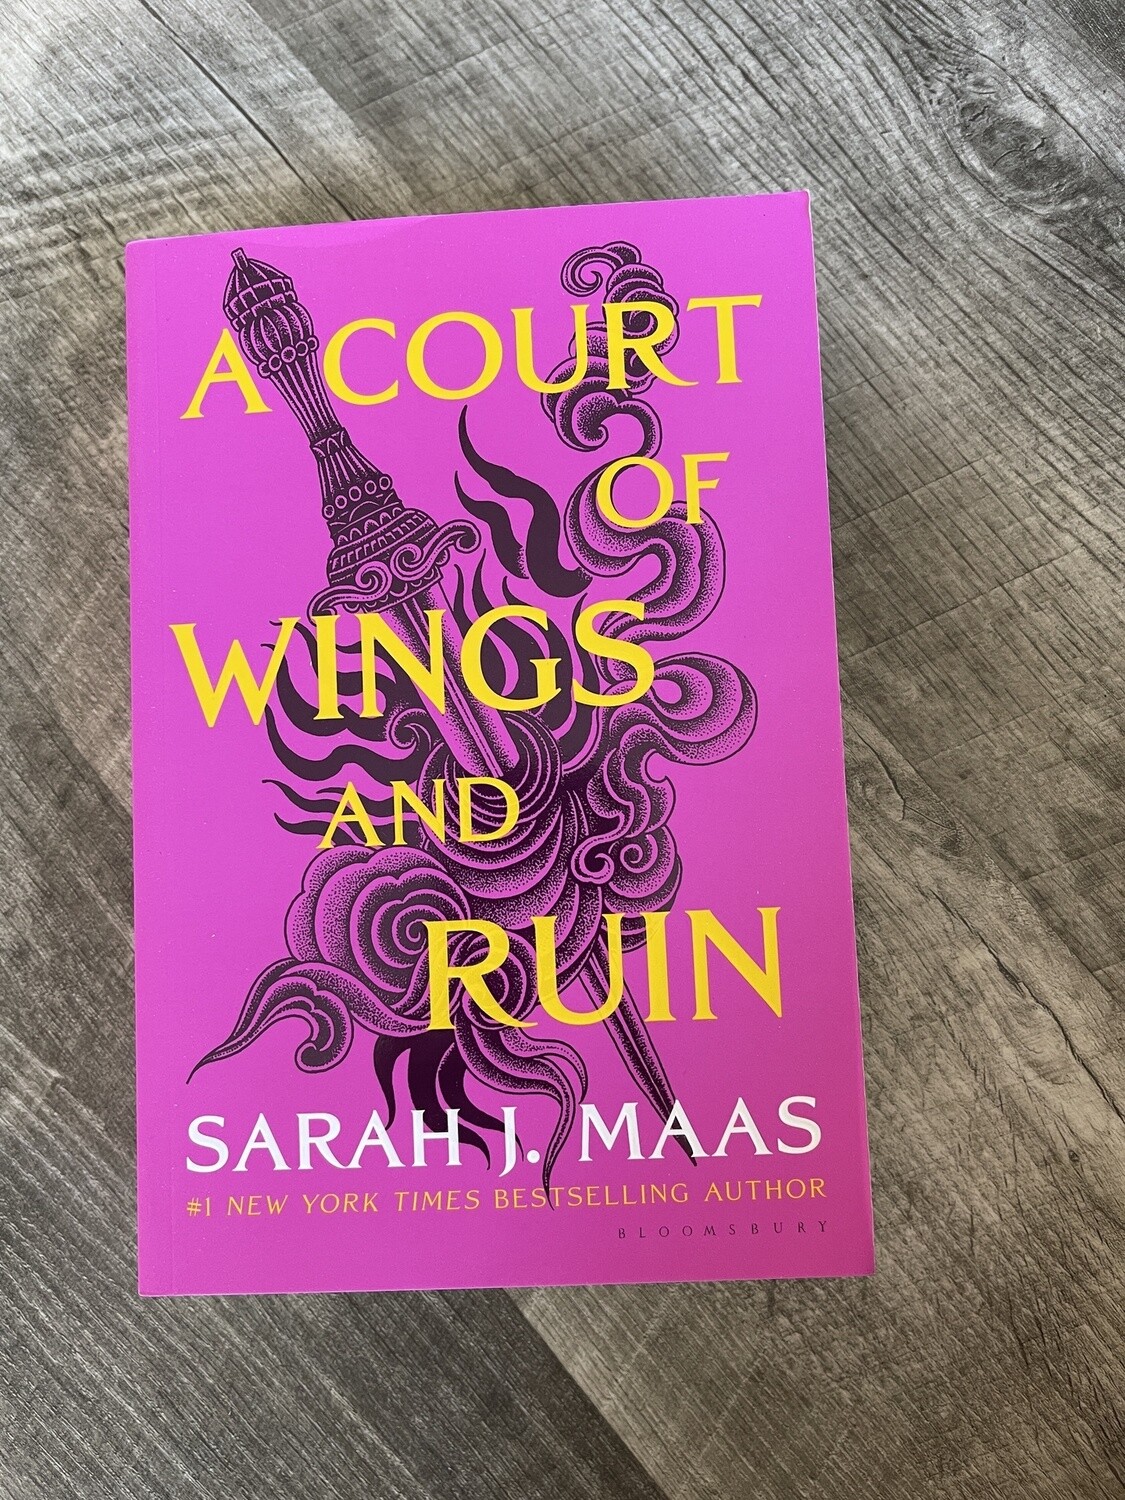 Maas, Sarah J- A Court of Wings and Ruin